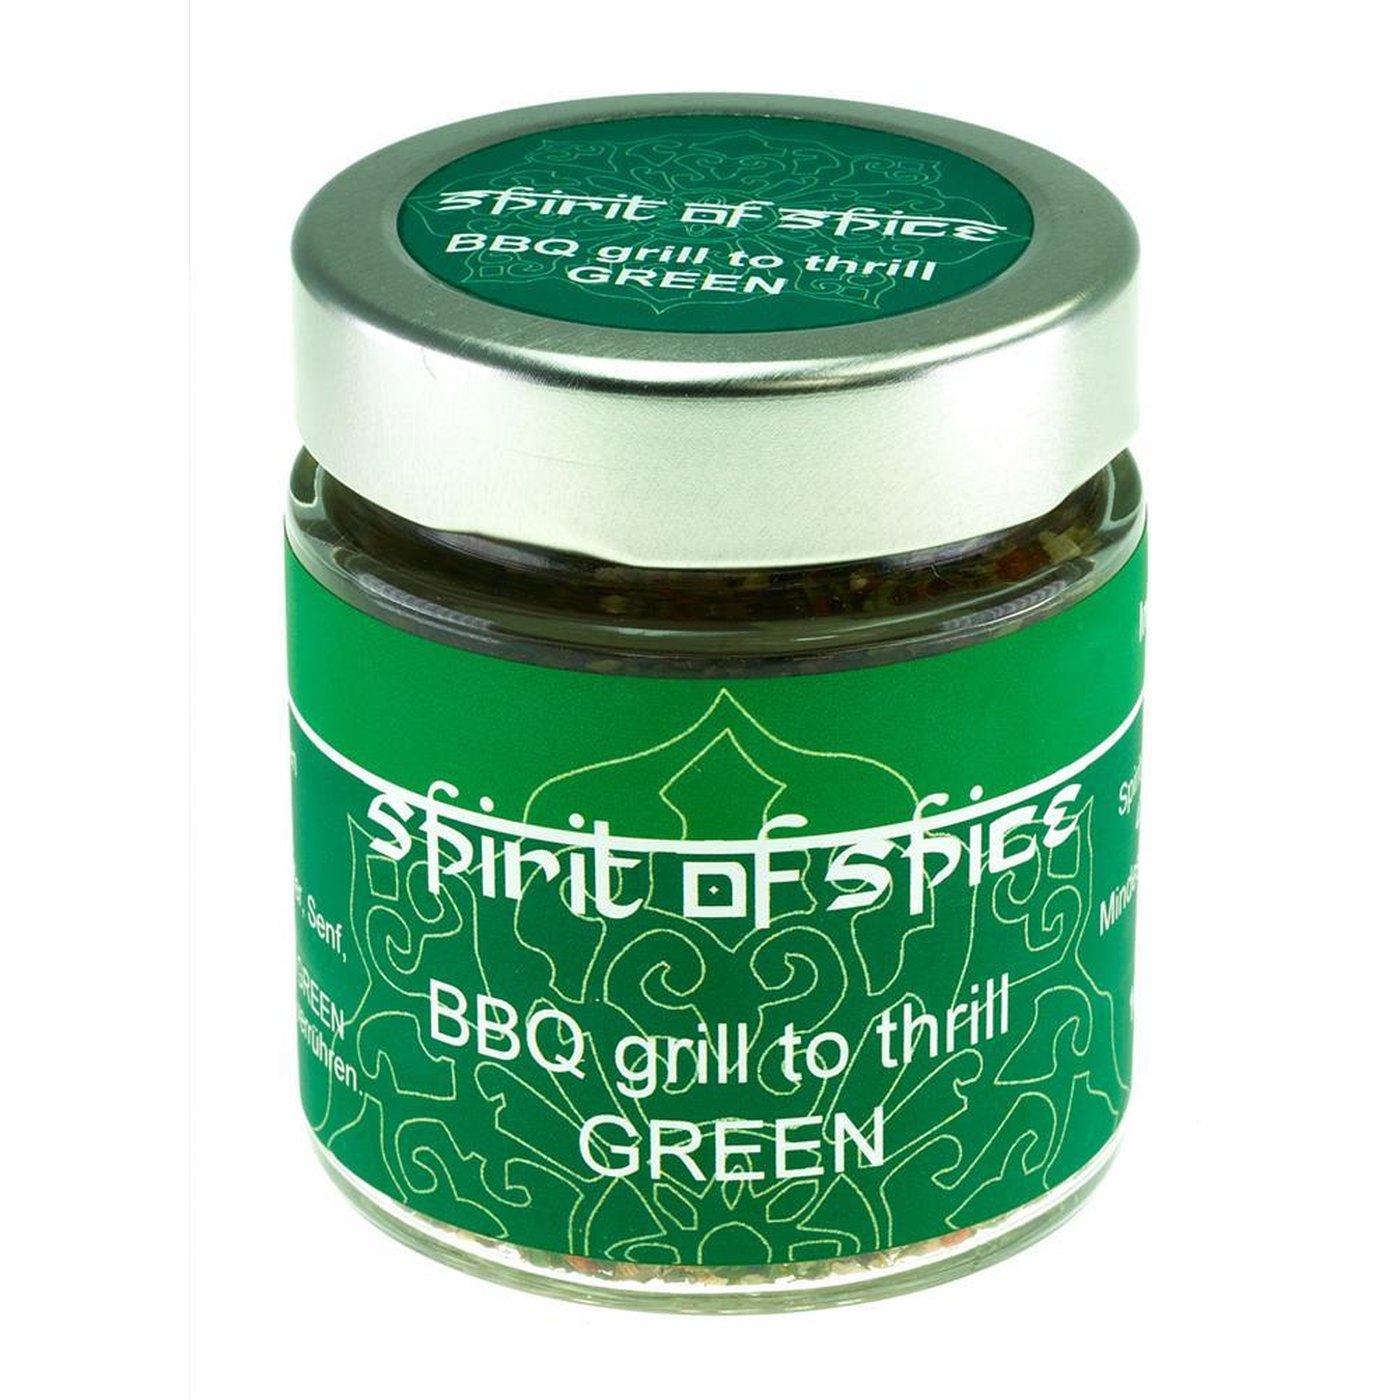 BBQ Grill to thrill Green, Glas, 35 g